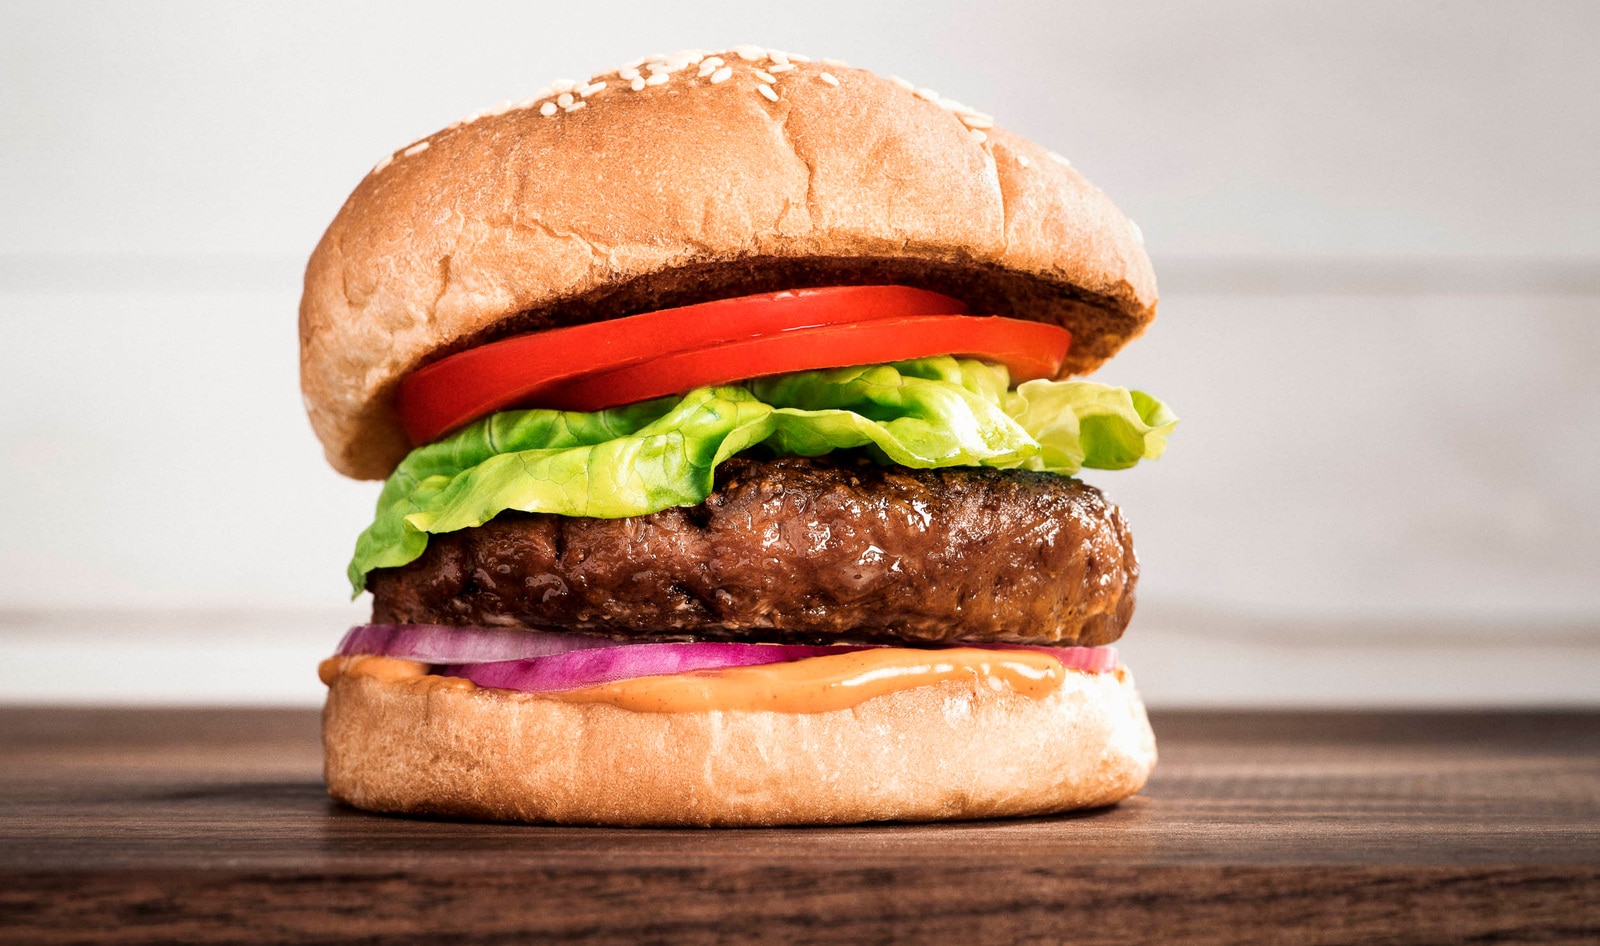 Beyond Burger Debuts in Alibaba’s Supermarkets in China